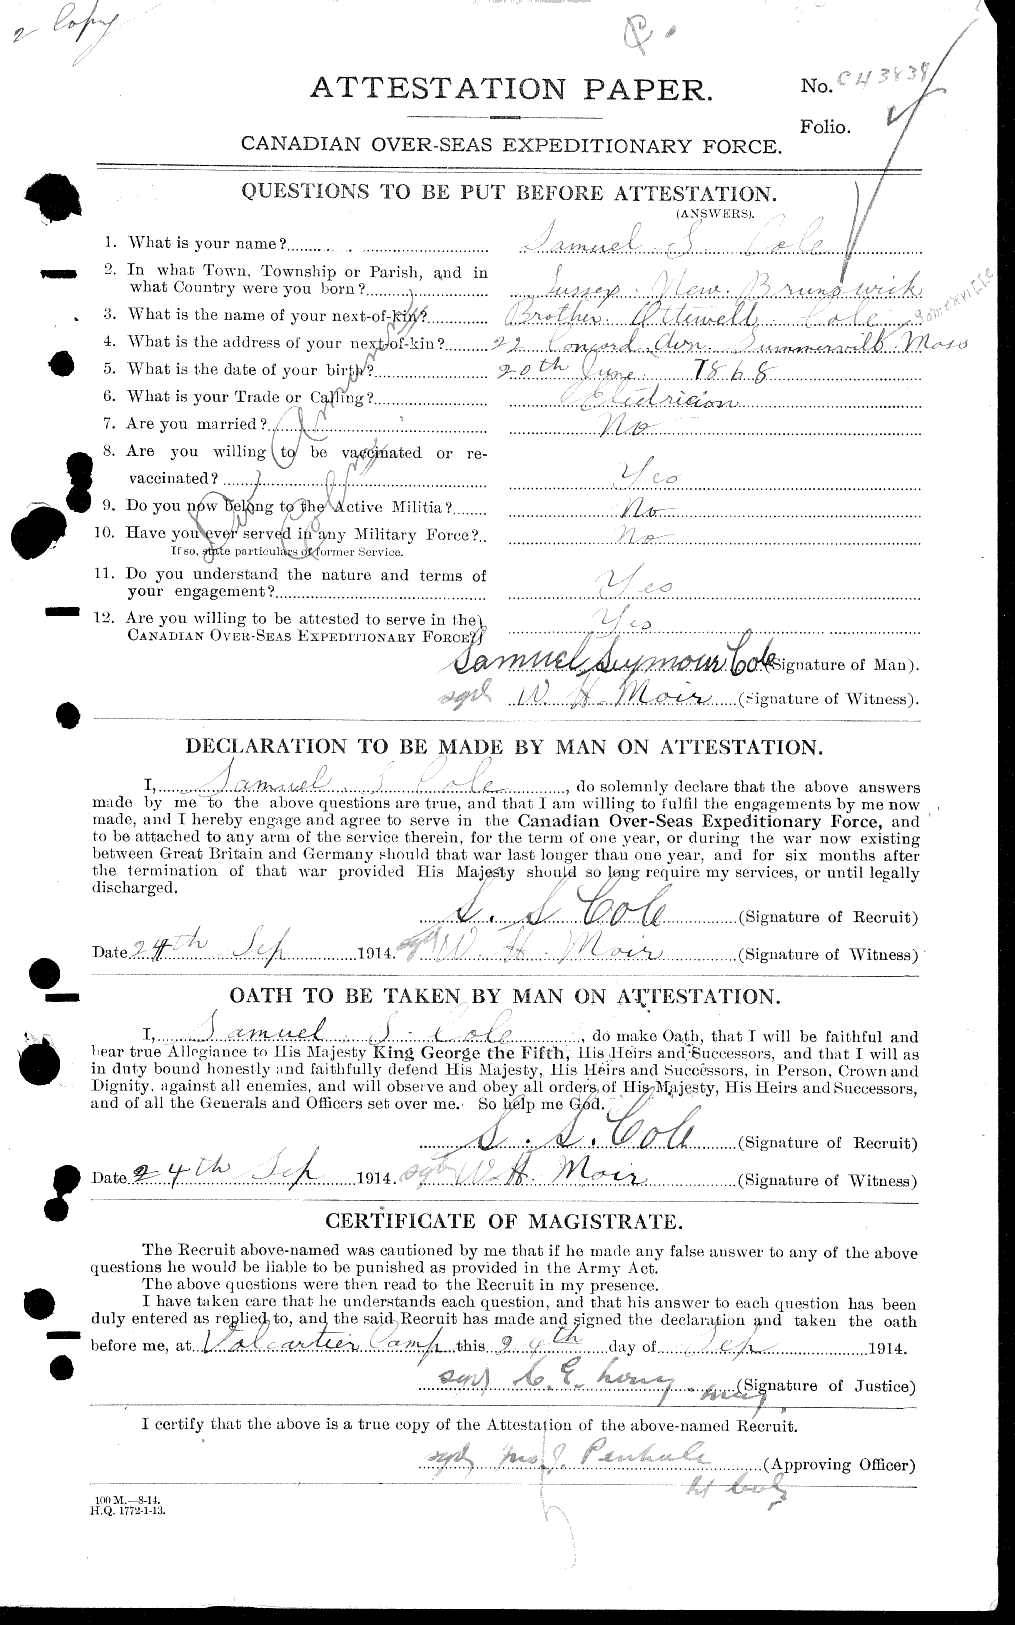 Personnel Records of the First World War - CEF 027943a